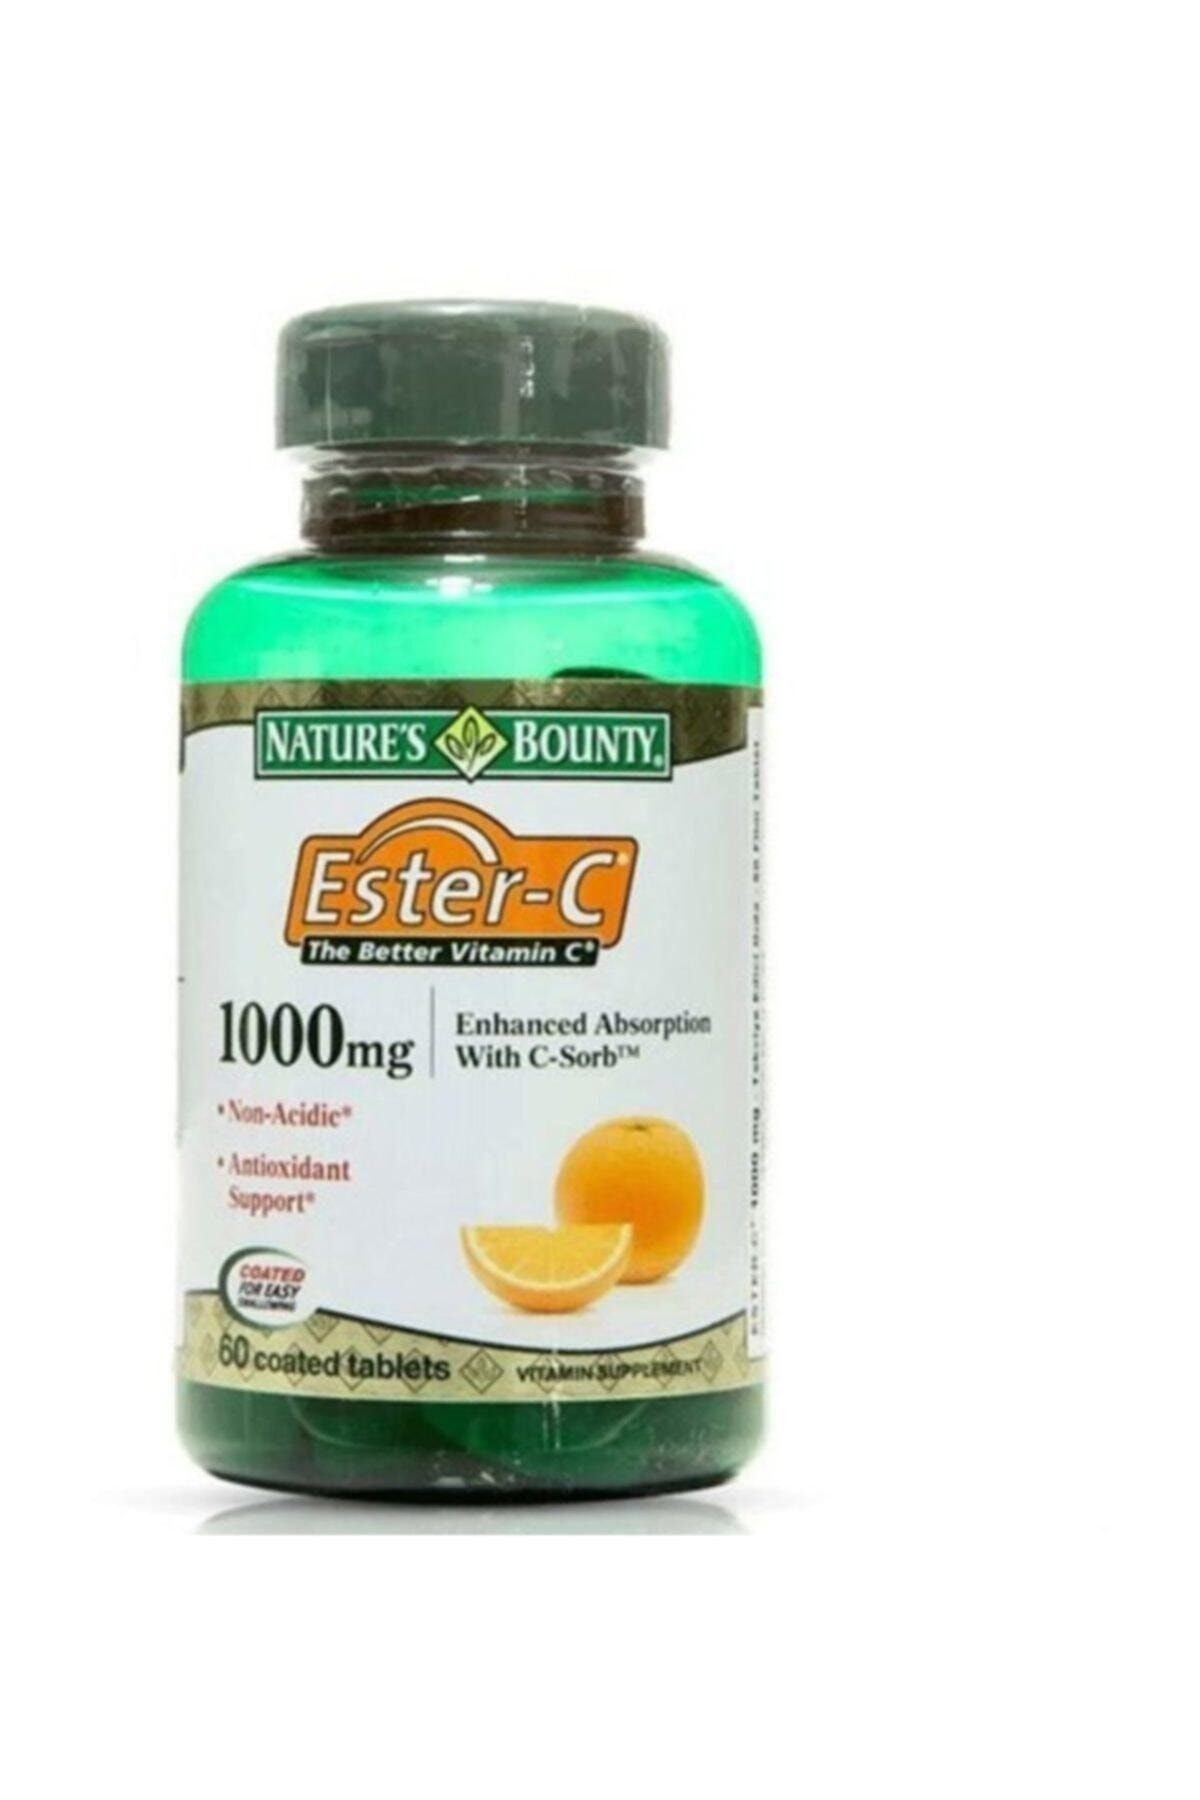 Nature's Bounty Ester-c 1000 Mg 60 Tablet